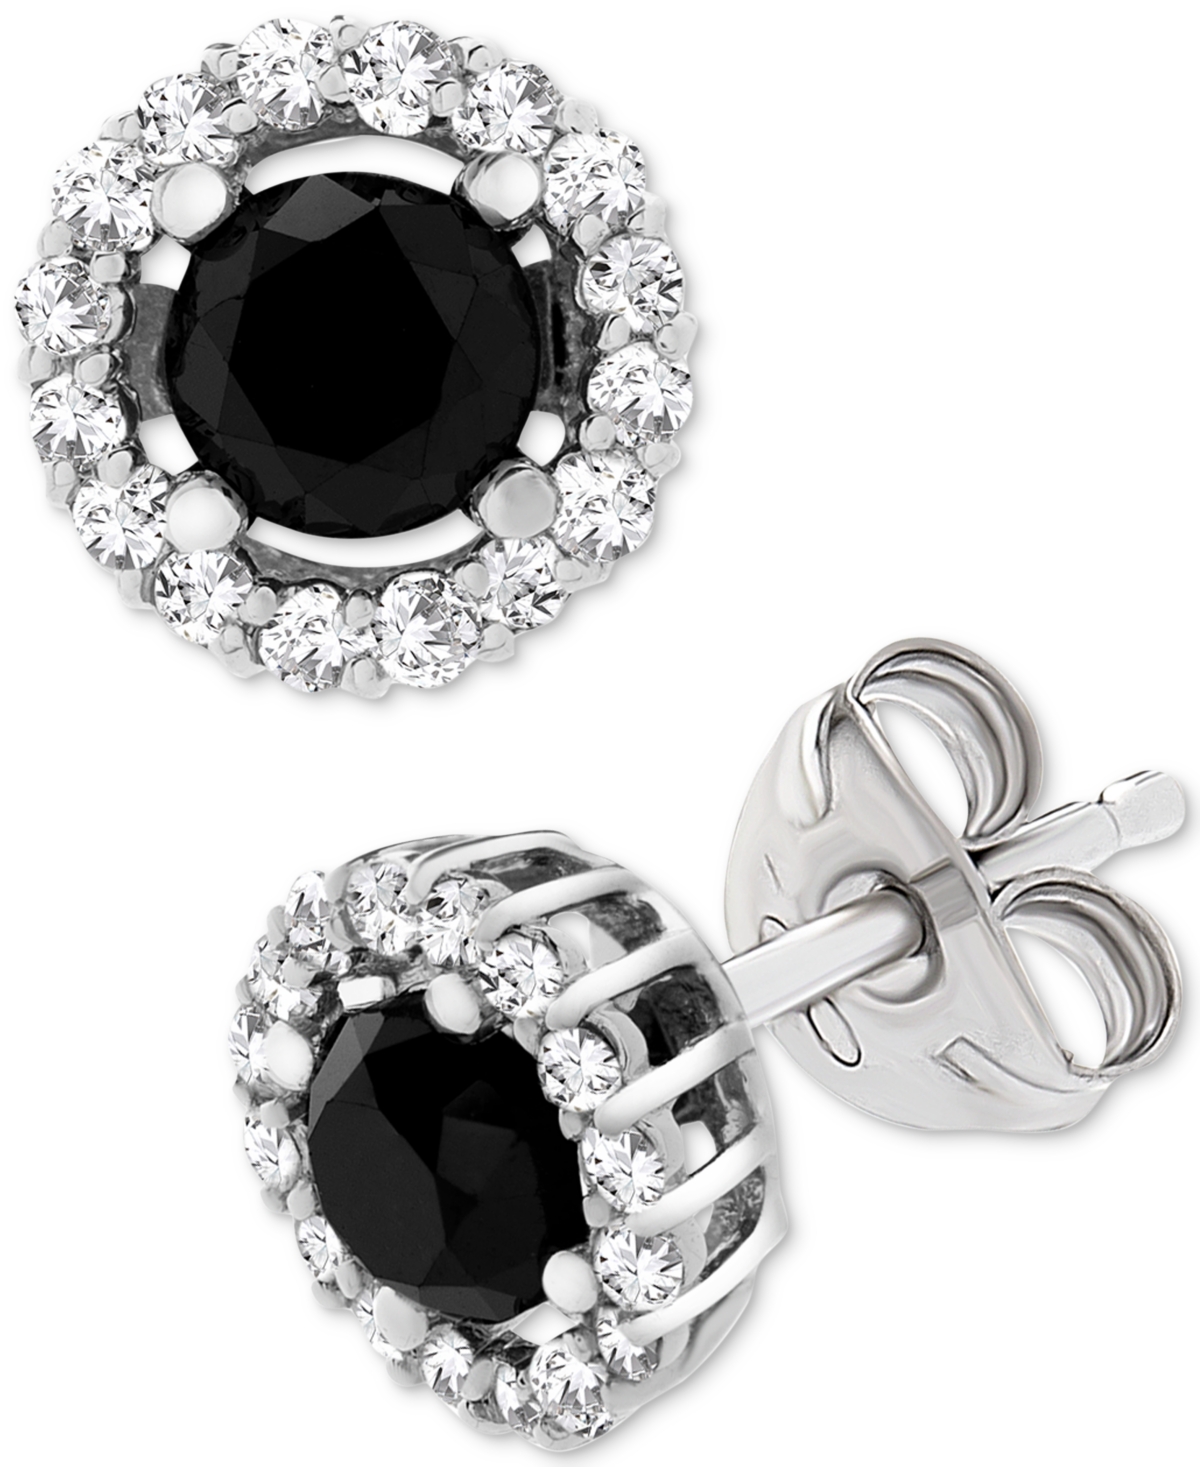 Black (1 ct. t.w.) and White Diamond Accent Stud Earrings in 14k White Gold, Created for Macy's - White Gold